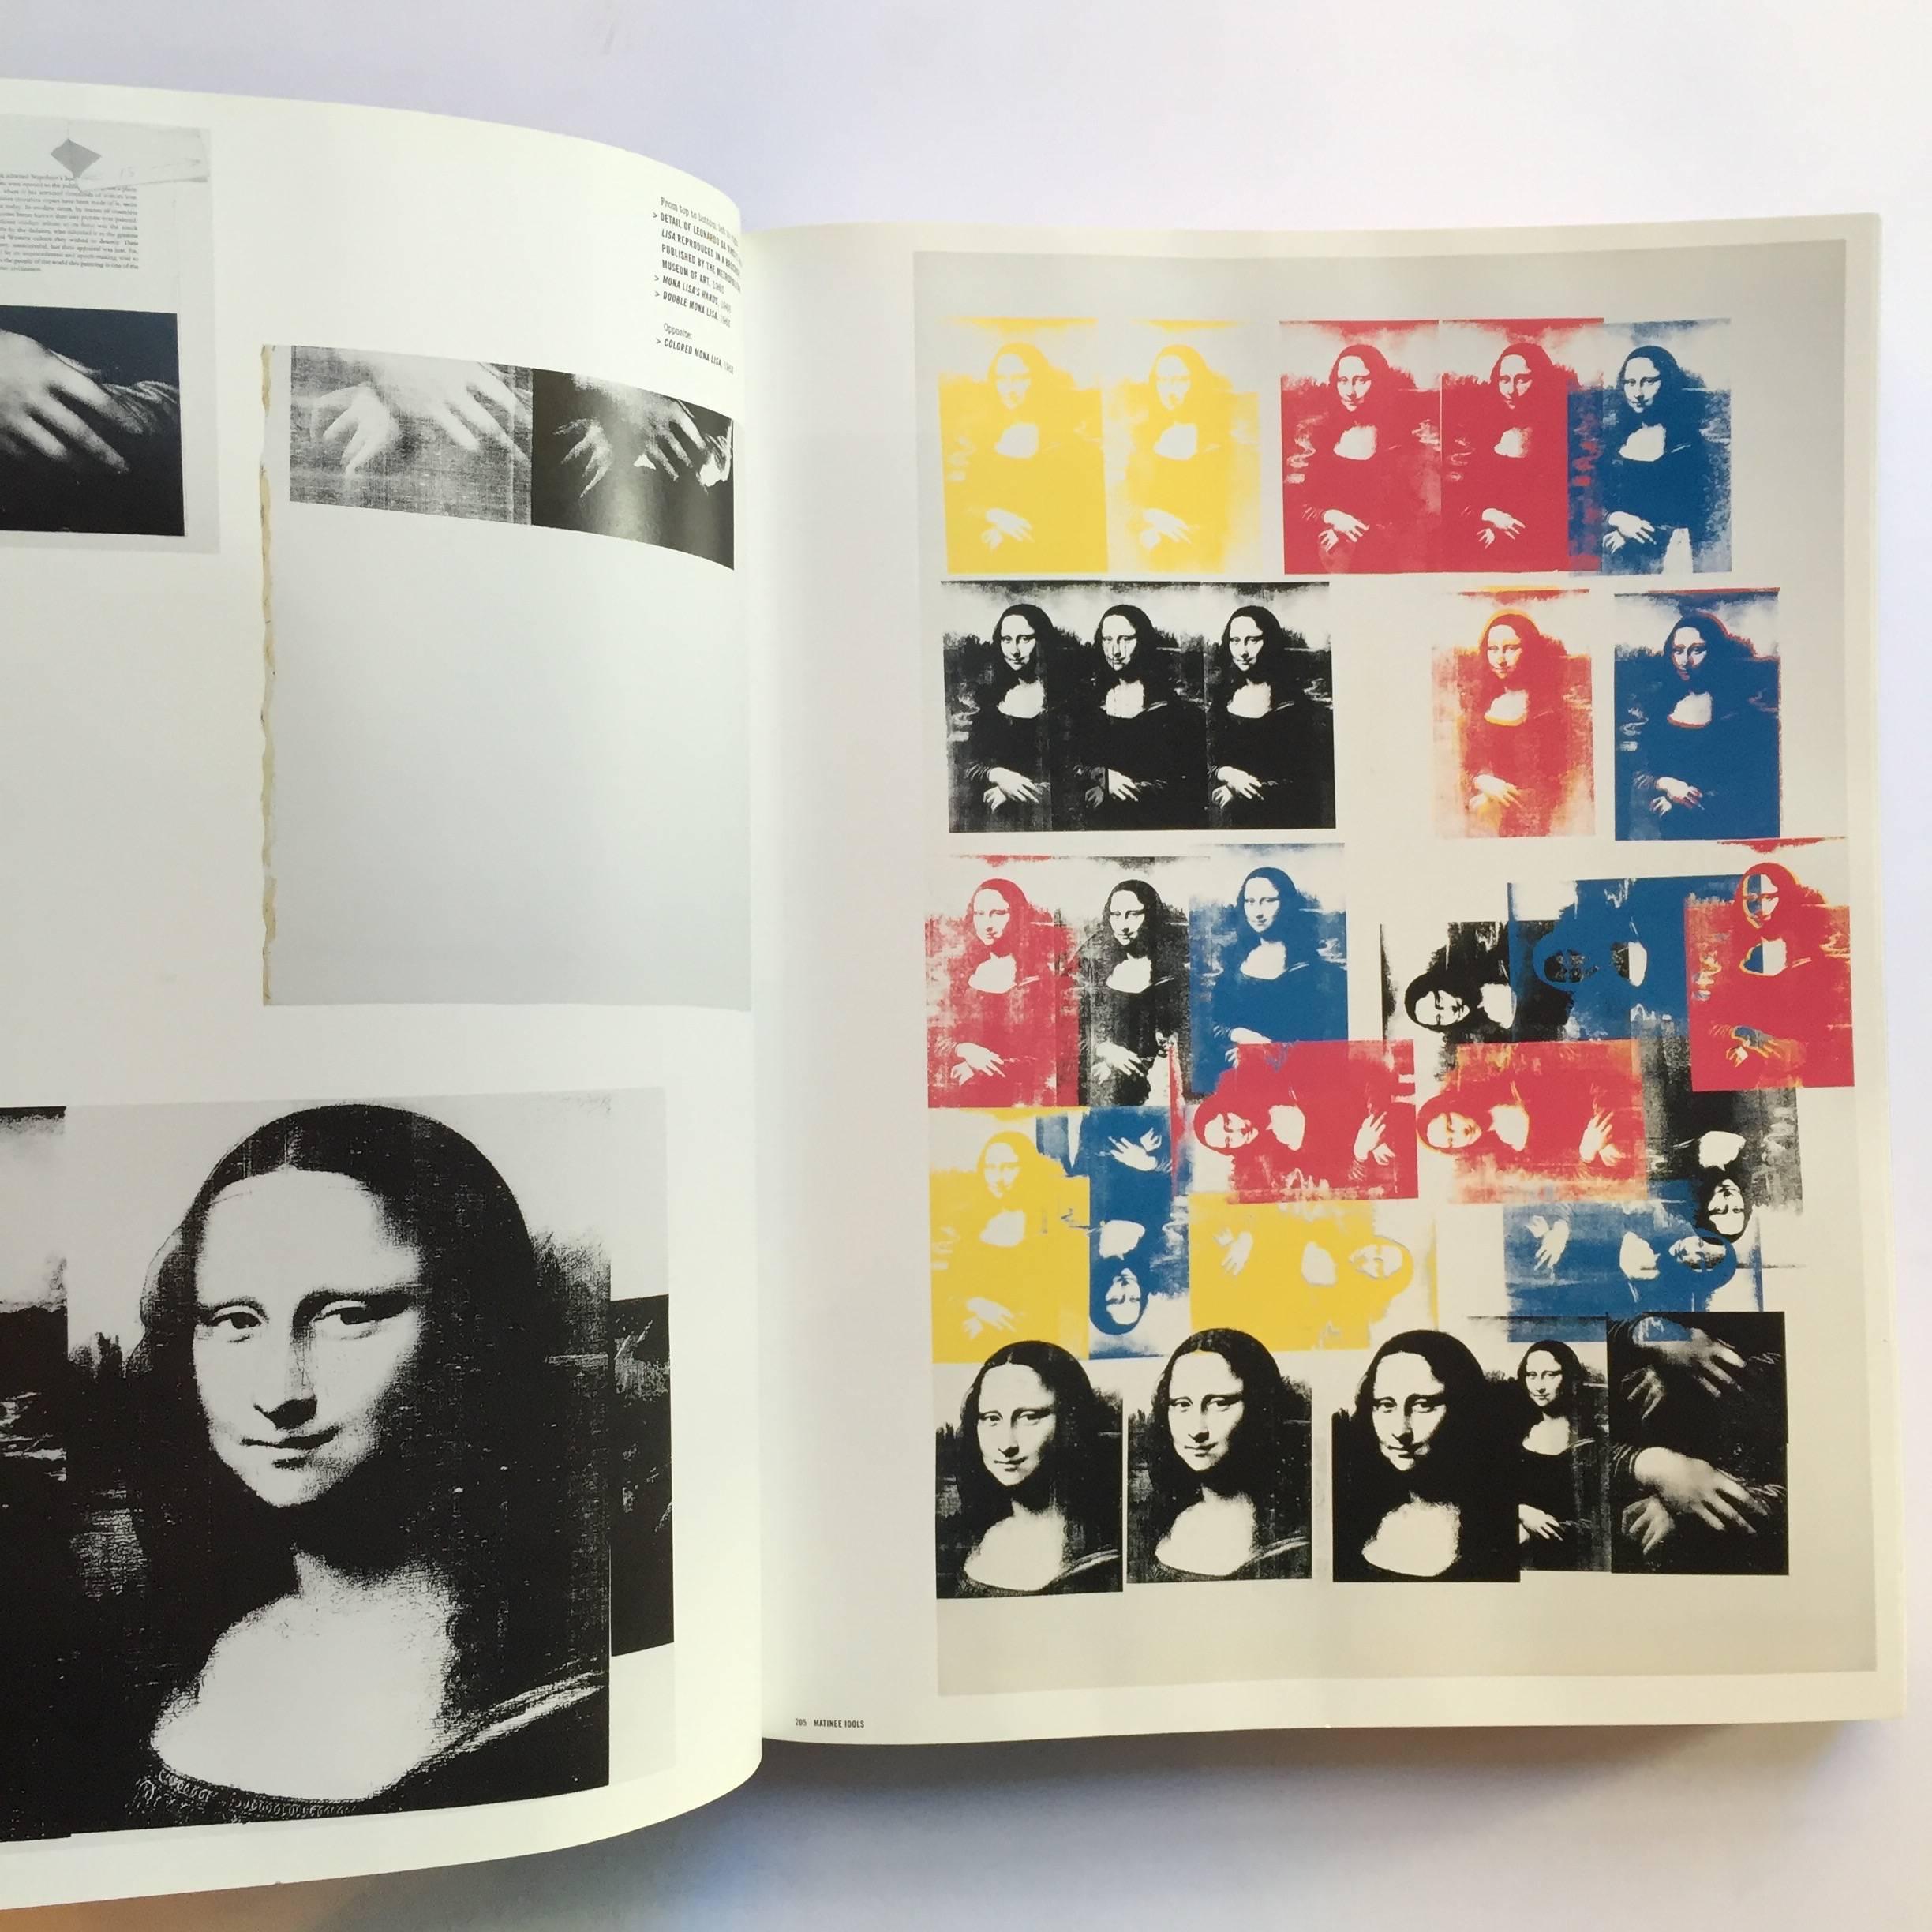 First edition, published by Phaidon, 2006.

In this humungous monograph of Andy Warhol’s life and work created by Phaidon, we see Warhol’s creative journey from childhood to his death in 1987. From small sketches, letters and ephemera from his